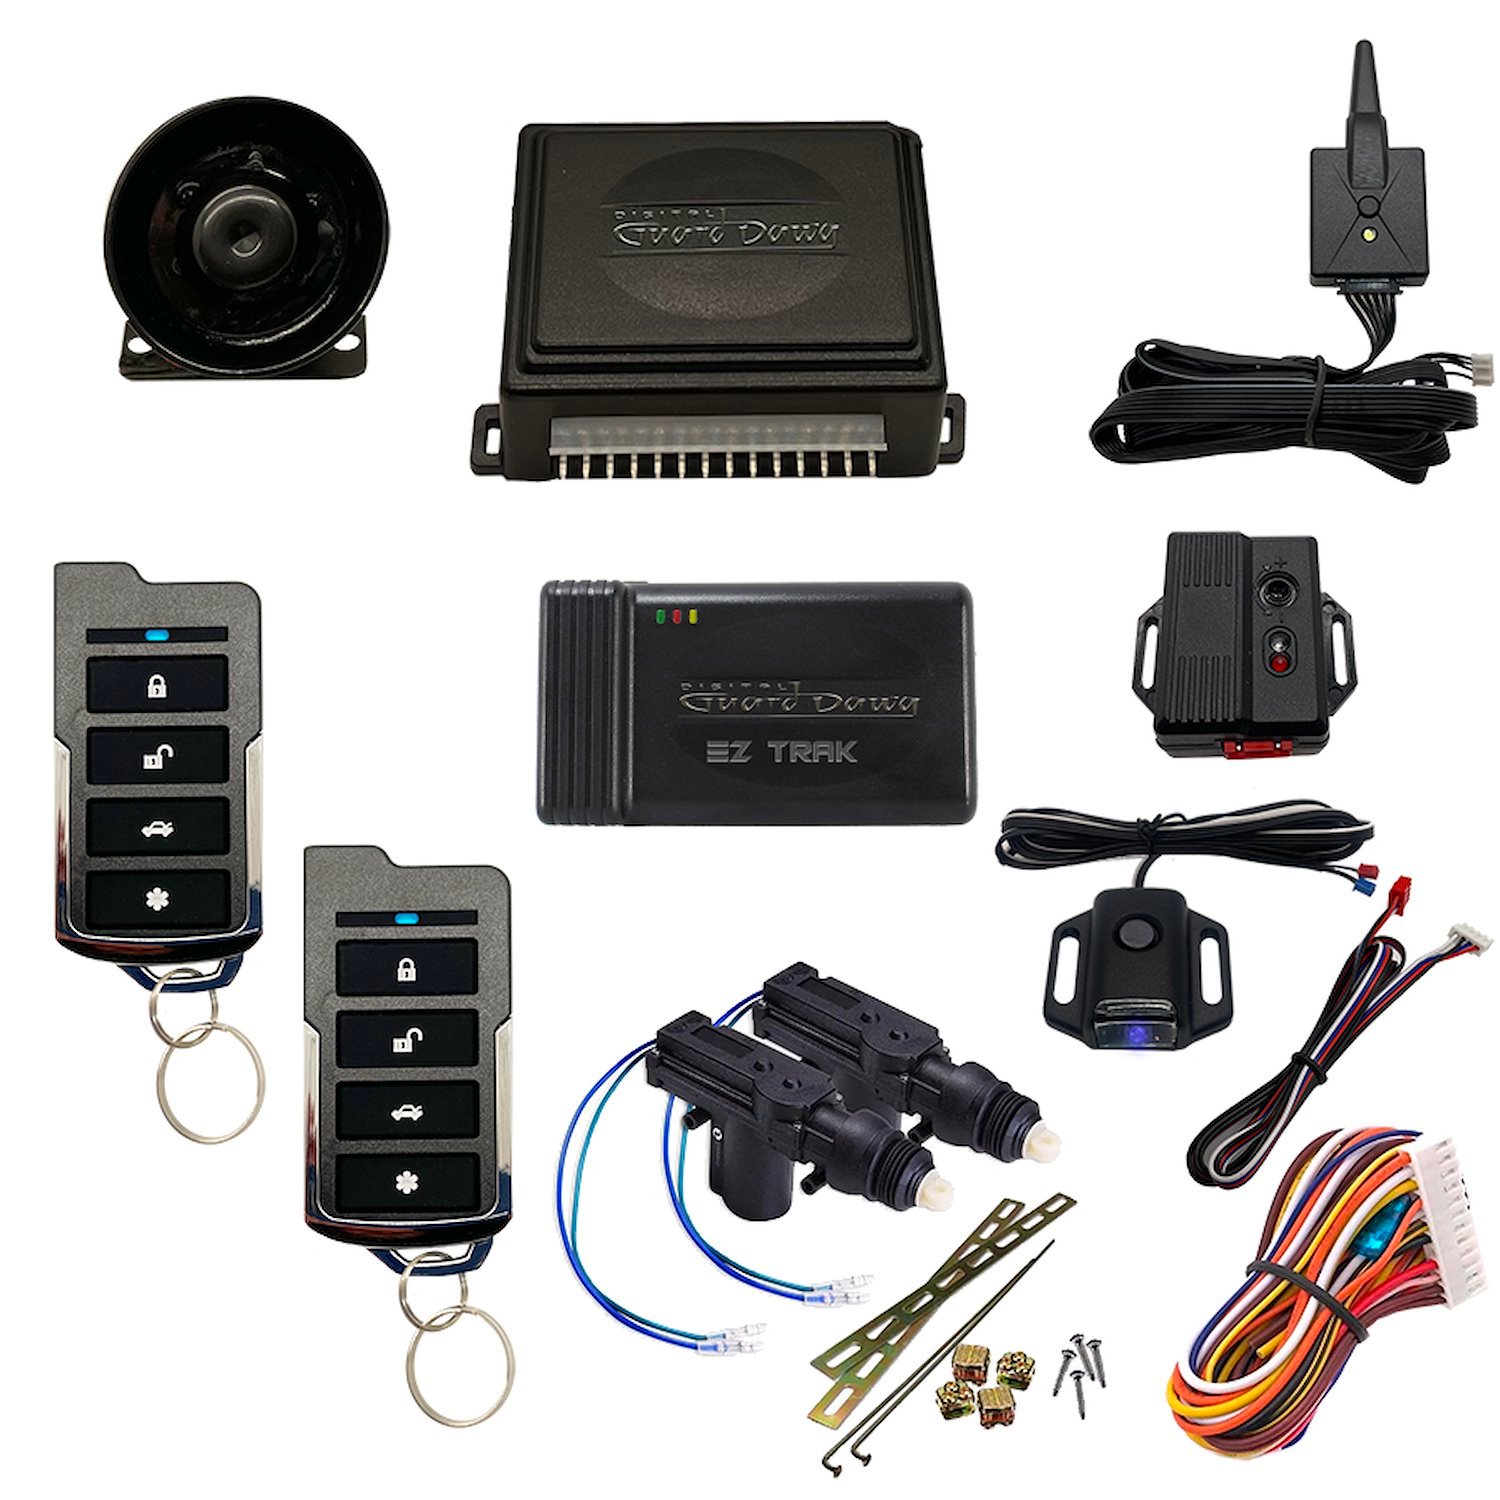 DGD-KY-ALM-1-2A-EZ Keyless Entry and Alarm System, 1-Way, w/2-Door Actuator Kit and Smart Phone EZ-Tracking